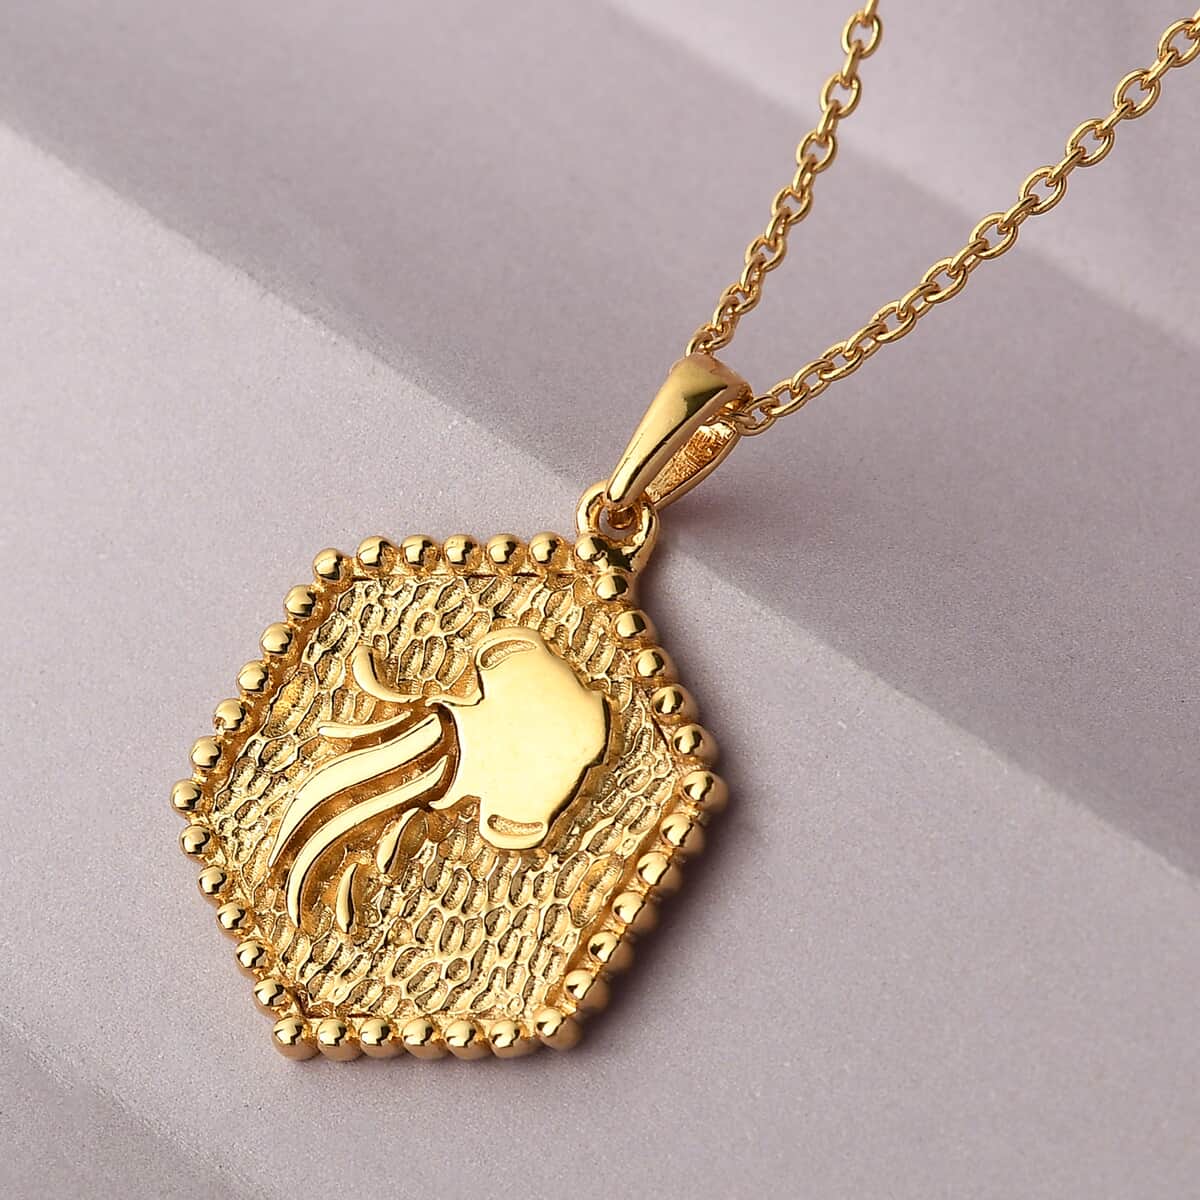 Karis Aquarius Zodiac Pendant in 18K YG Plated with ION Plated Yellow Gold Stainless Steel Necklace 20 Inches image number 1